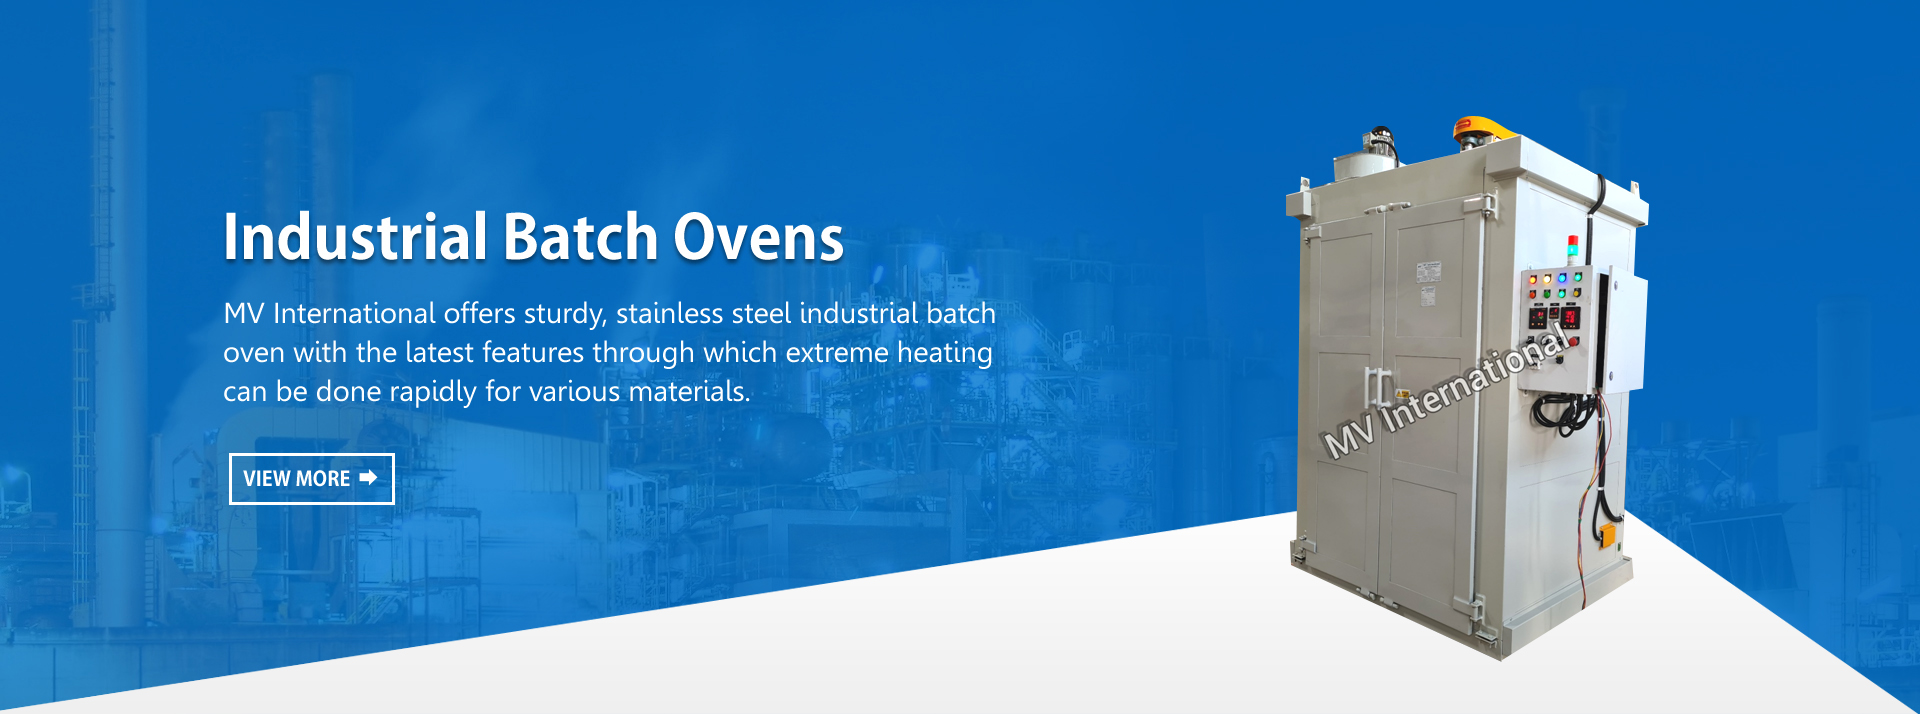 industrial batch ovens